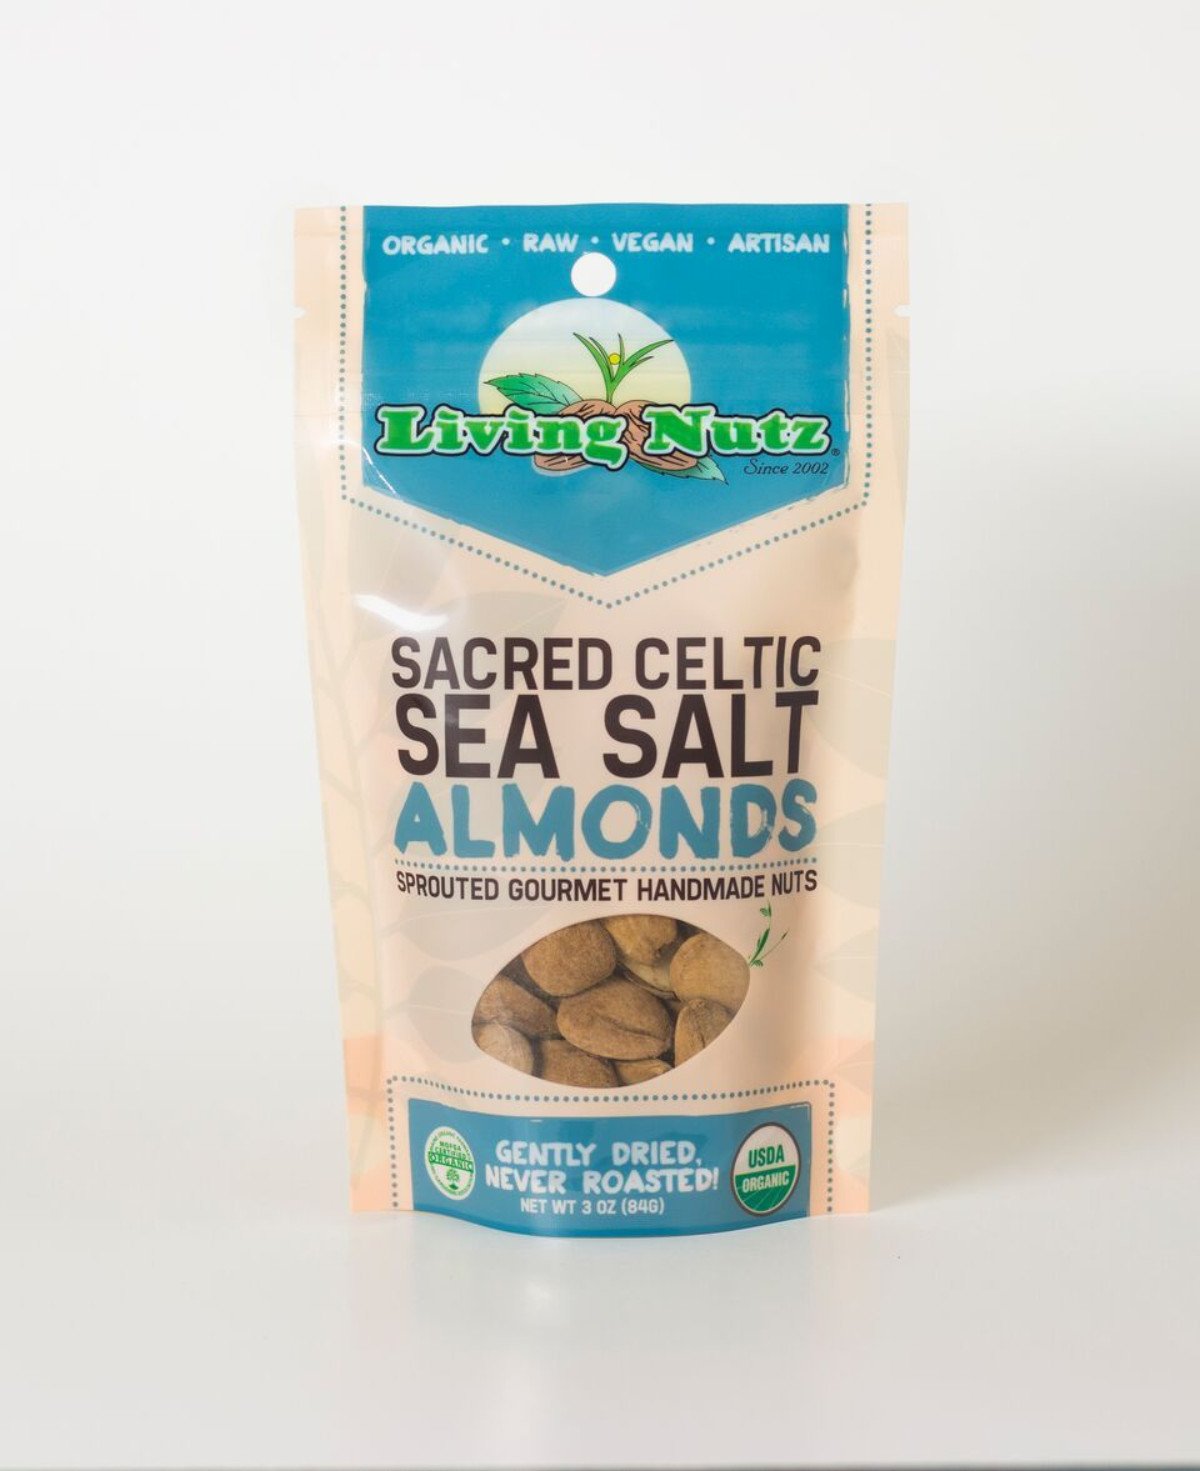 Organic raw sprouted nuts. Sprouted raw & unpasteurized almonds with sea salt. Living Nutz organic snacks.